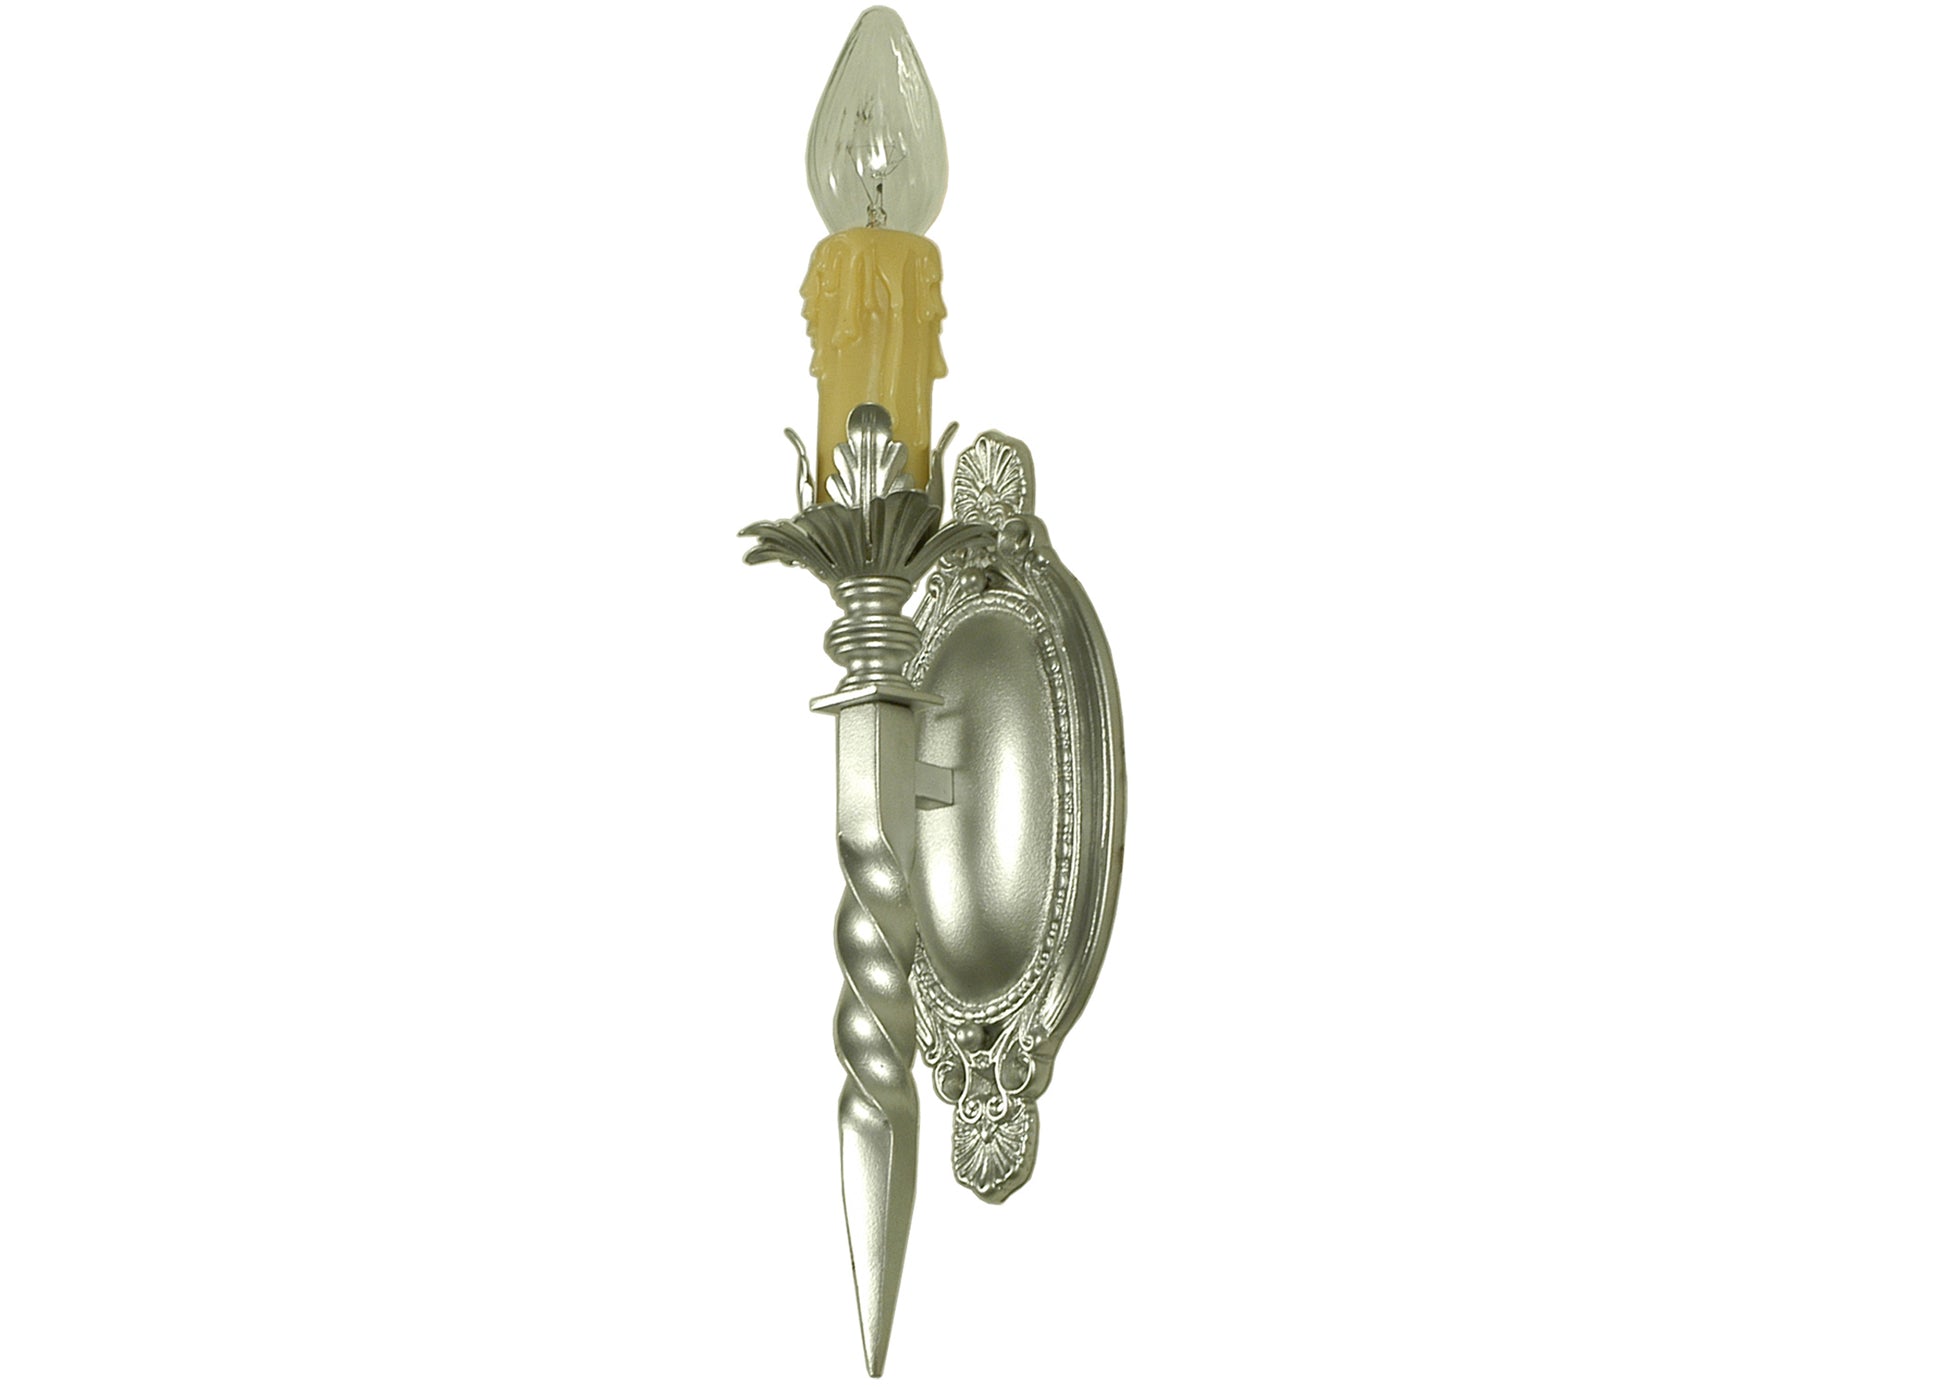 2nd Avenue 4.5" Coronel Wall Sconce